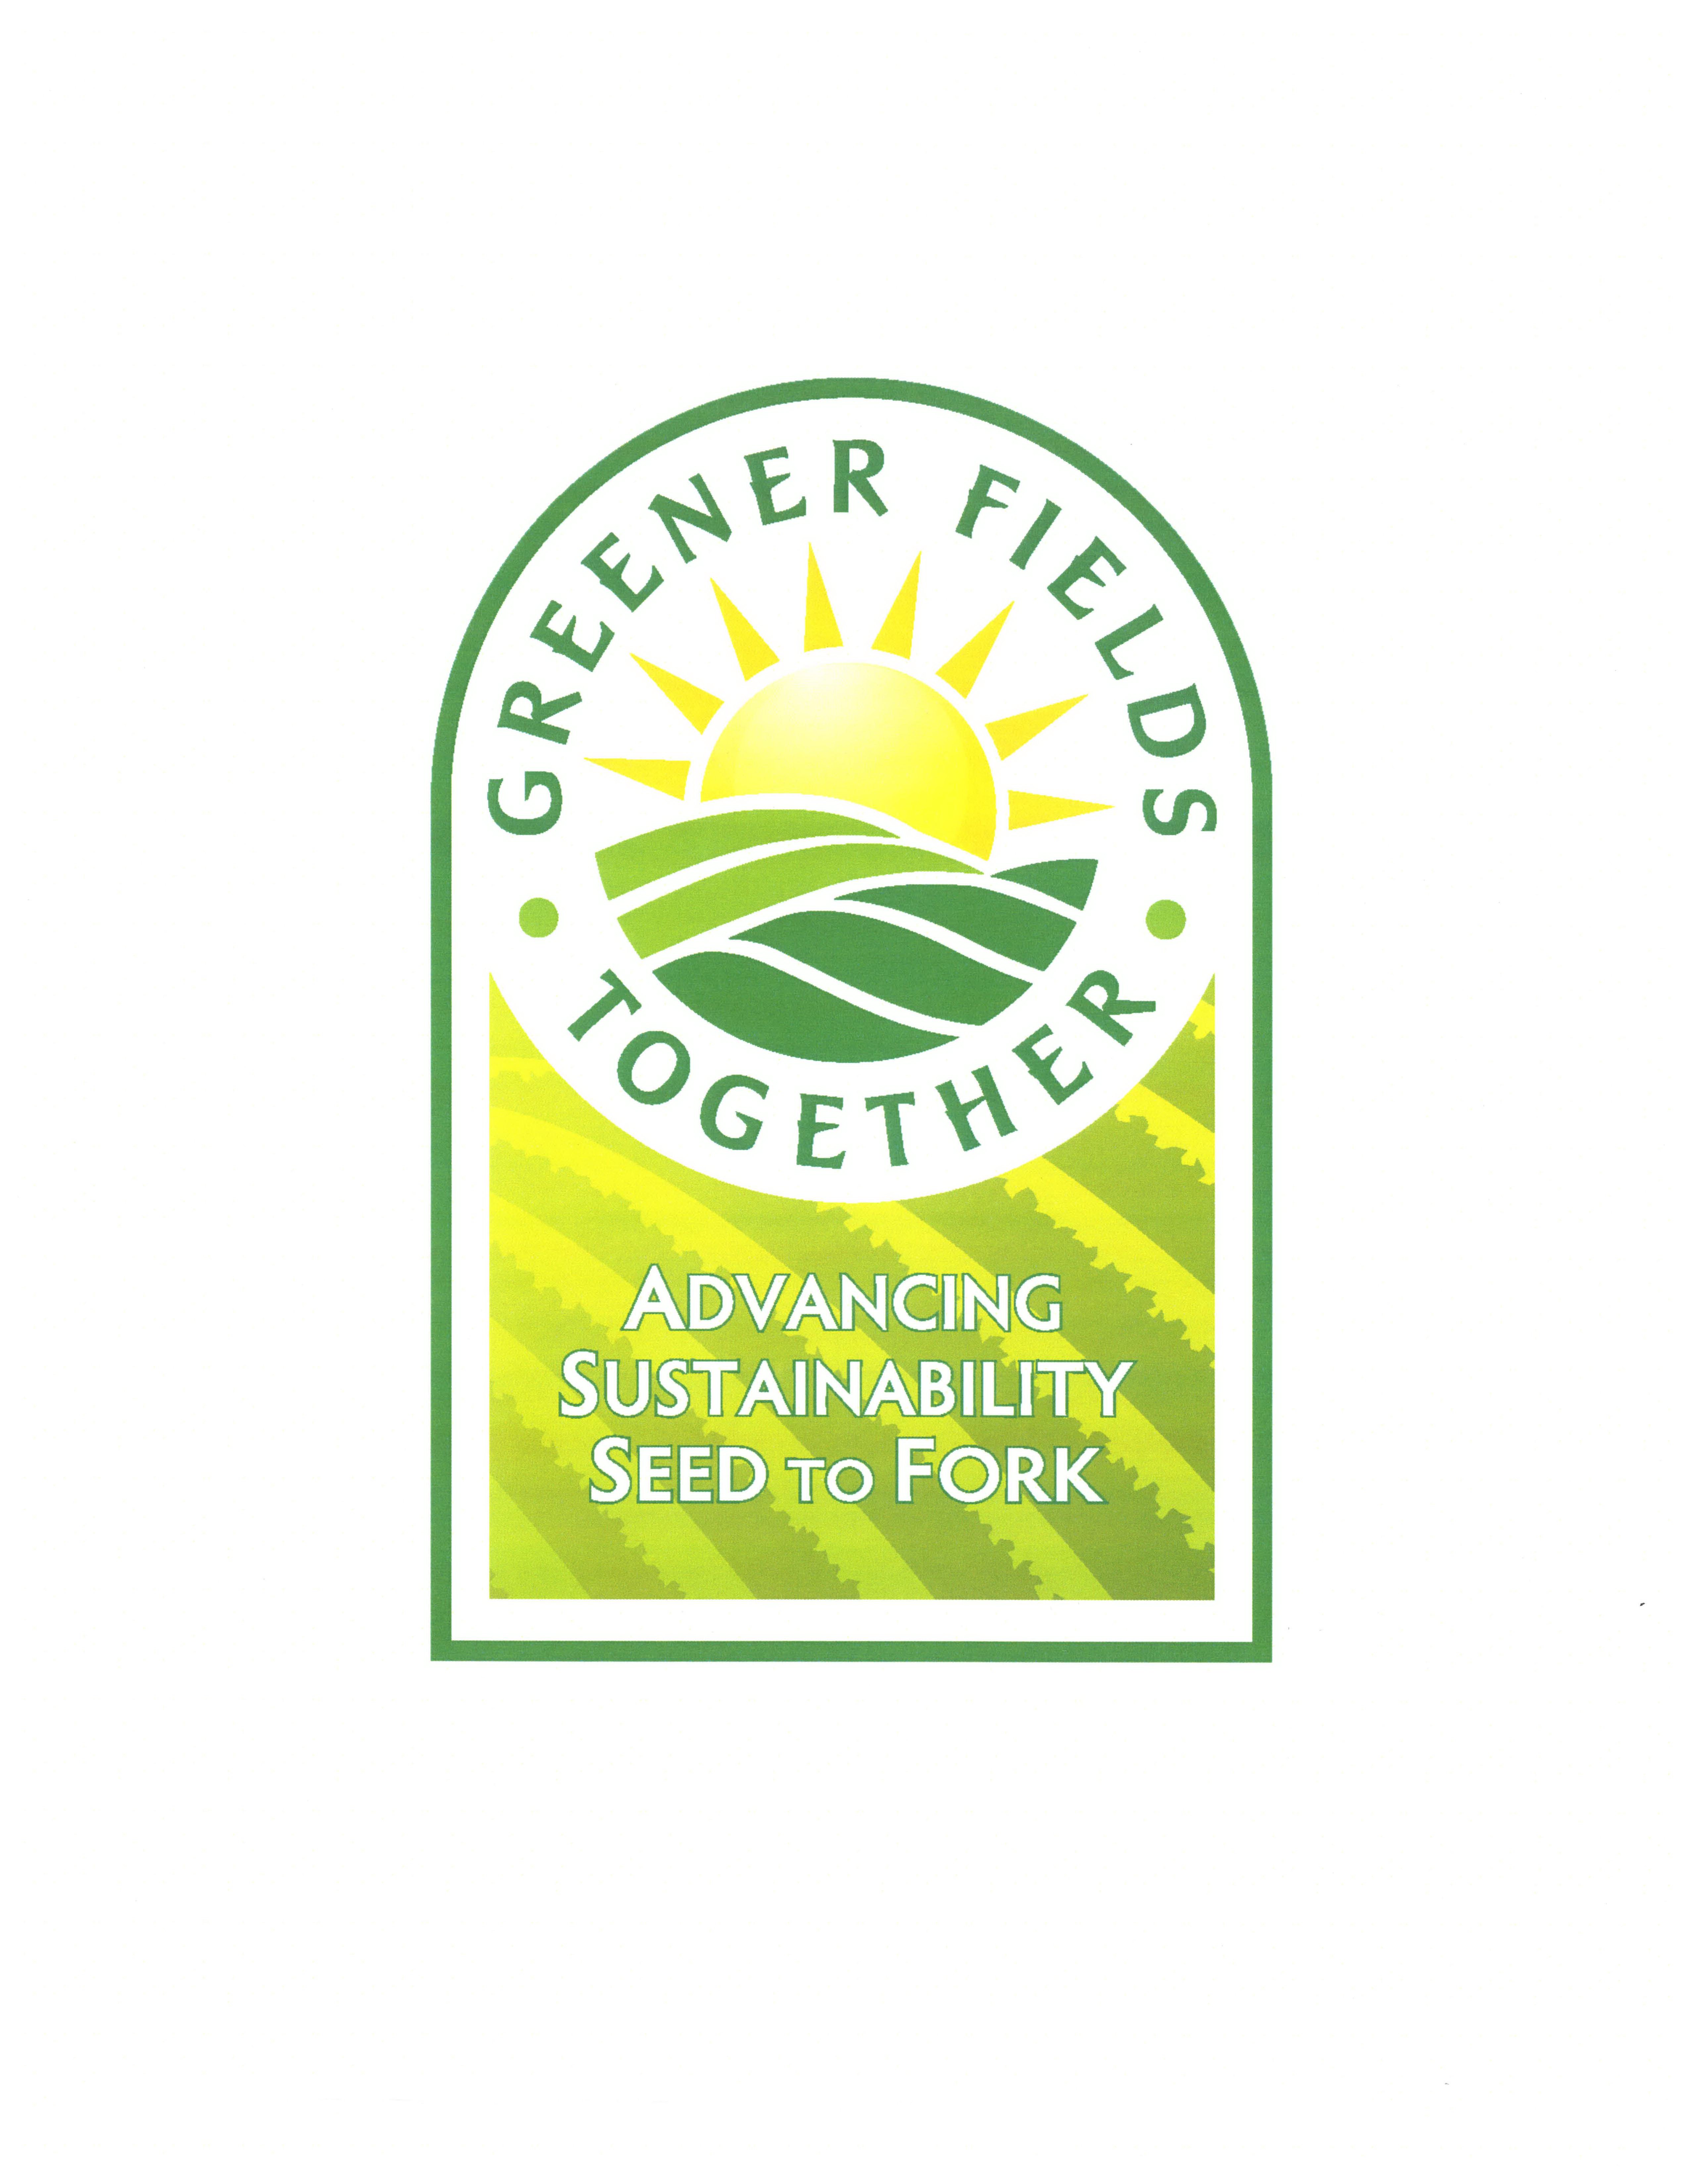  · GREENER FIELDS Â· TOGETHER ADVANCING SUSTAINABILITY SEED TO FORK